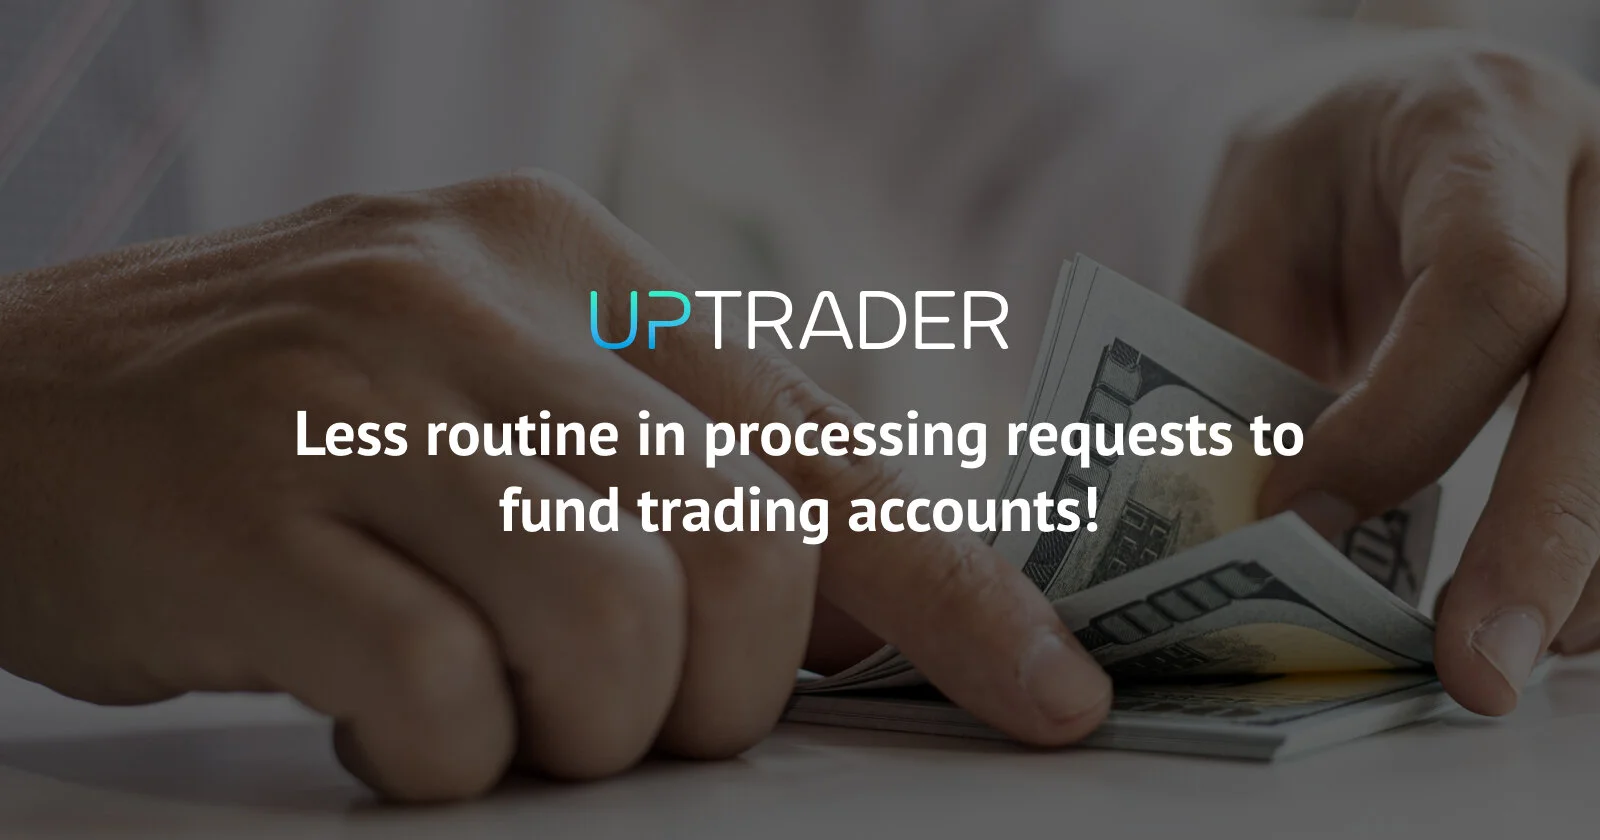 Less Routine in Processing Requests for Account Replenishment!